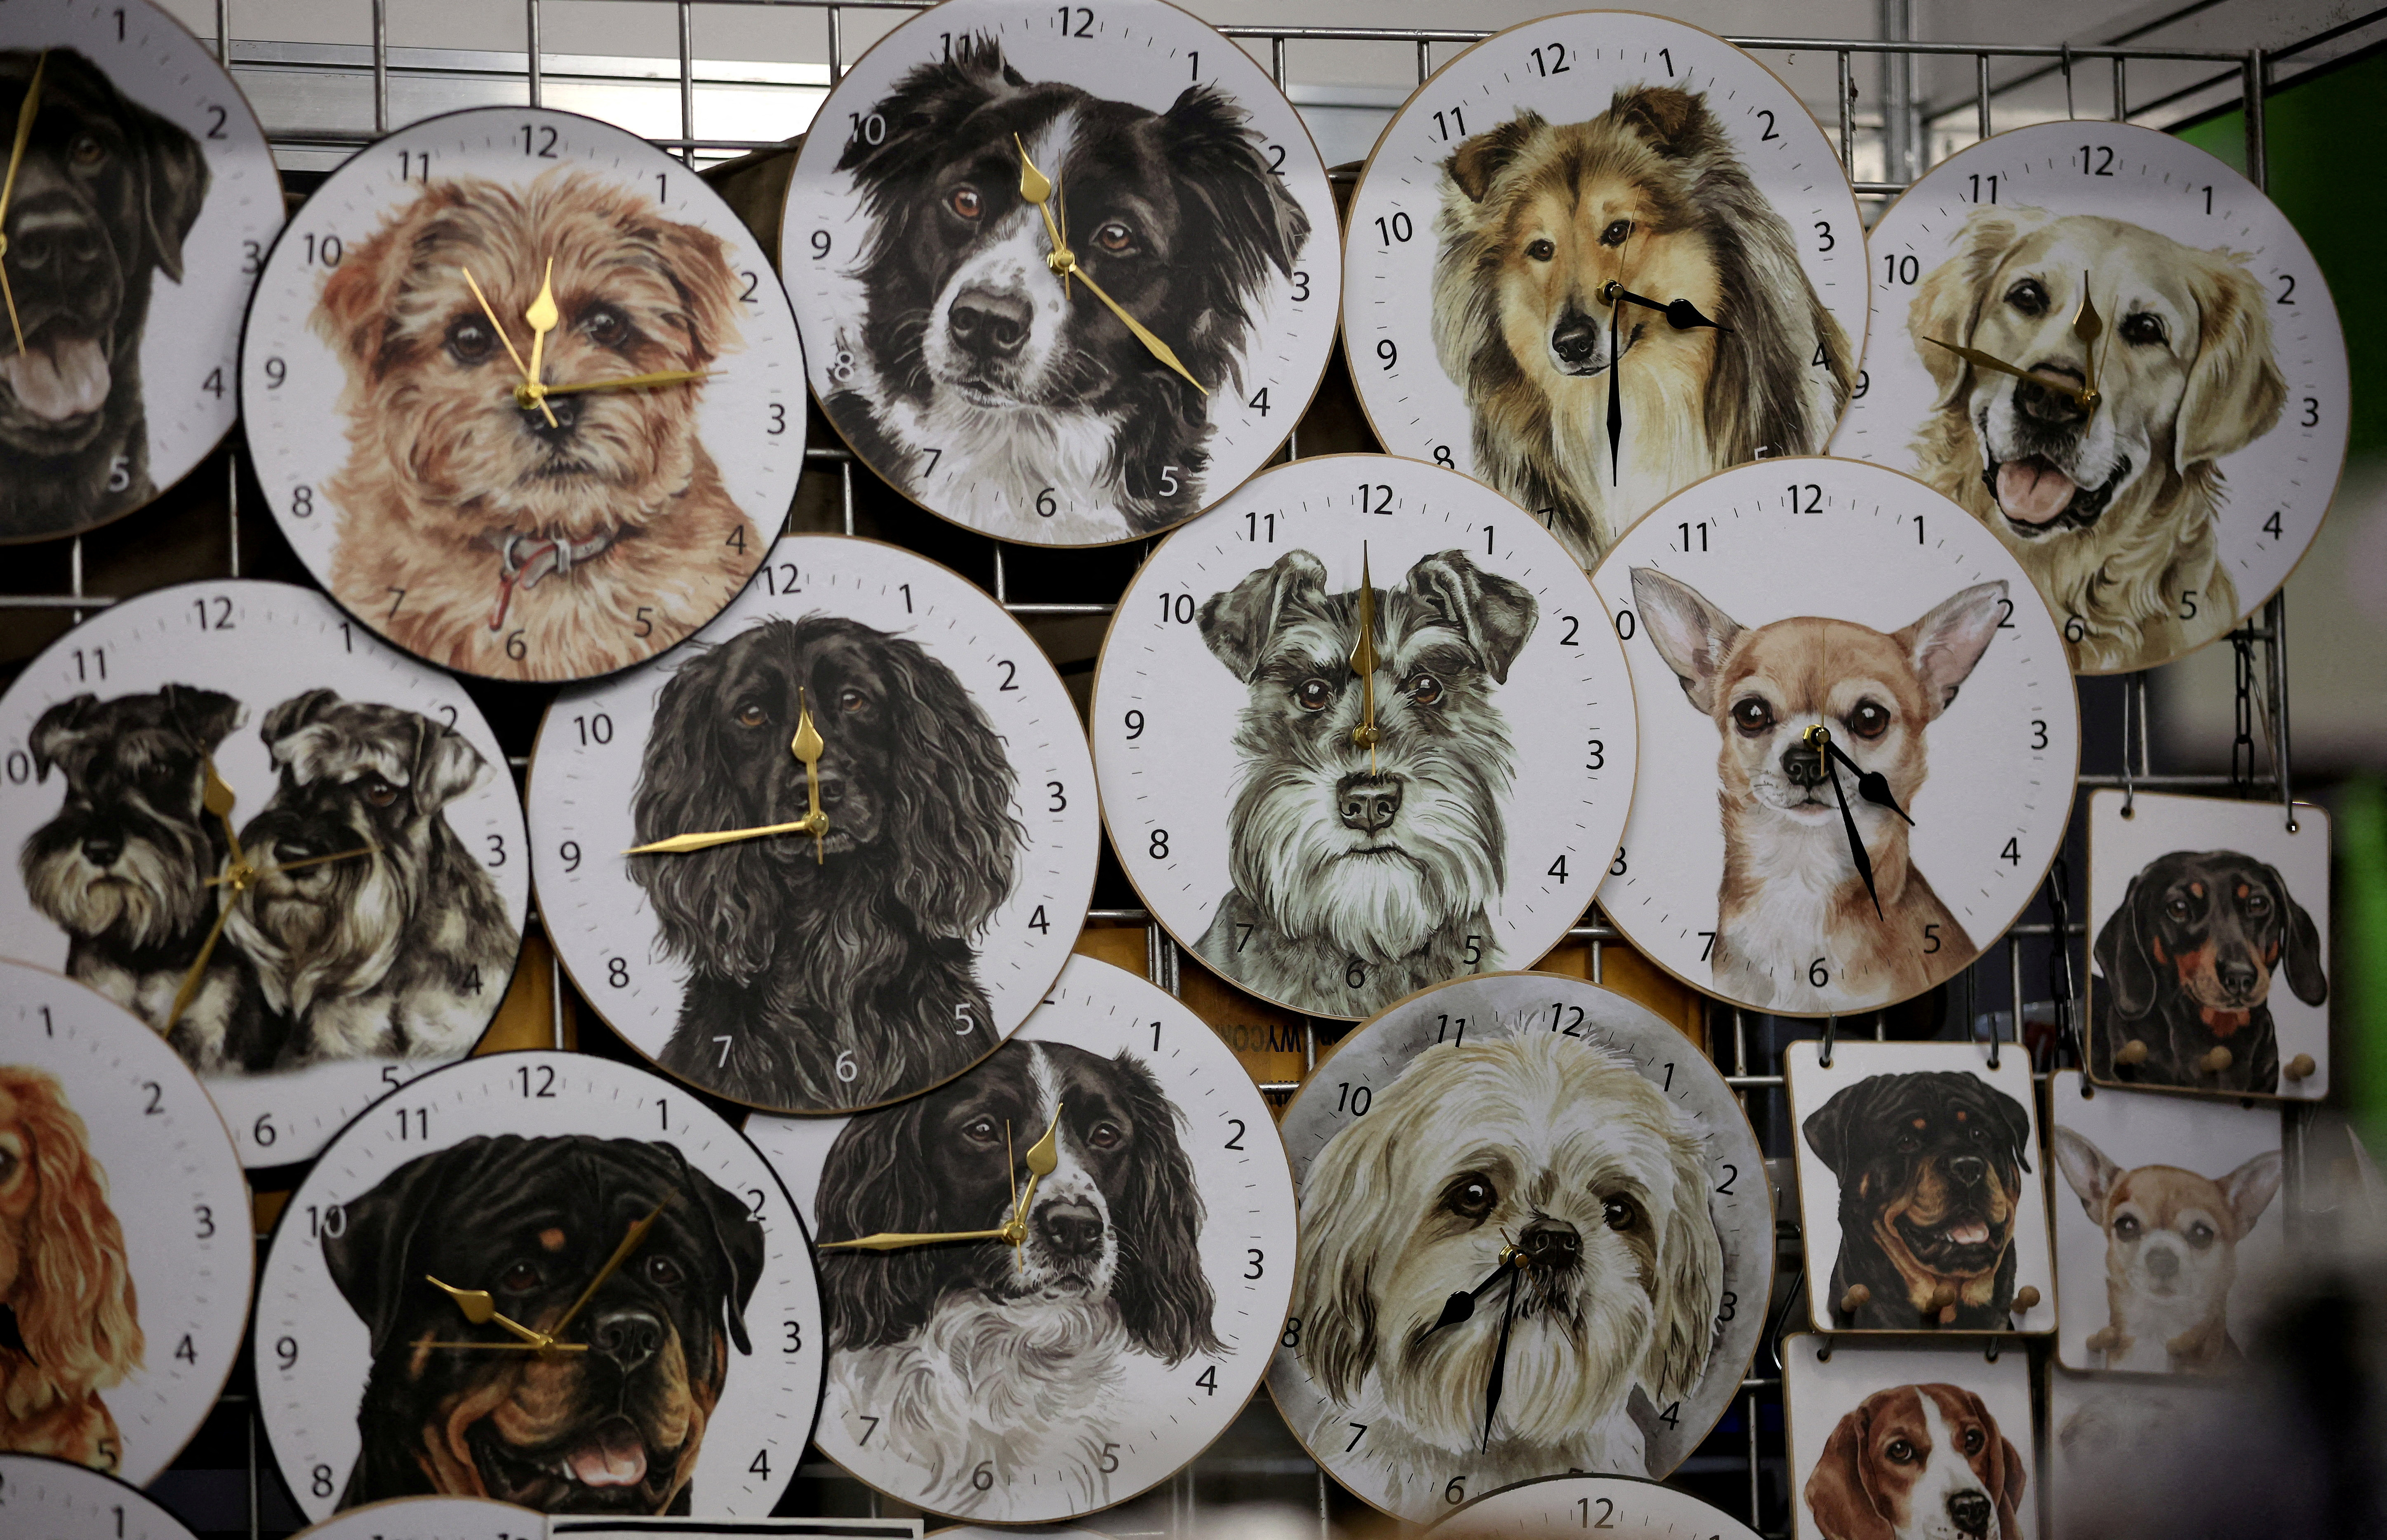 Dog themed Clocks by Christine Varley are seen for sale on the WaggyDogz trade stand on the third day of the Crufts dog show in Birmingham